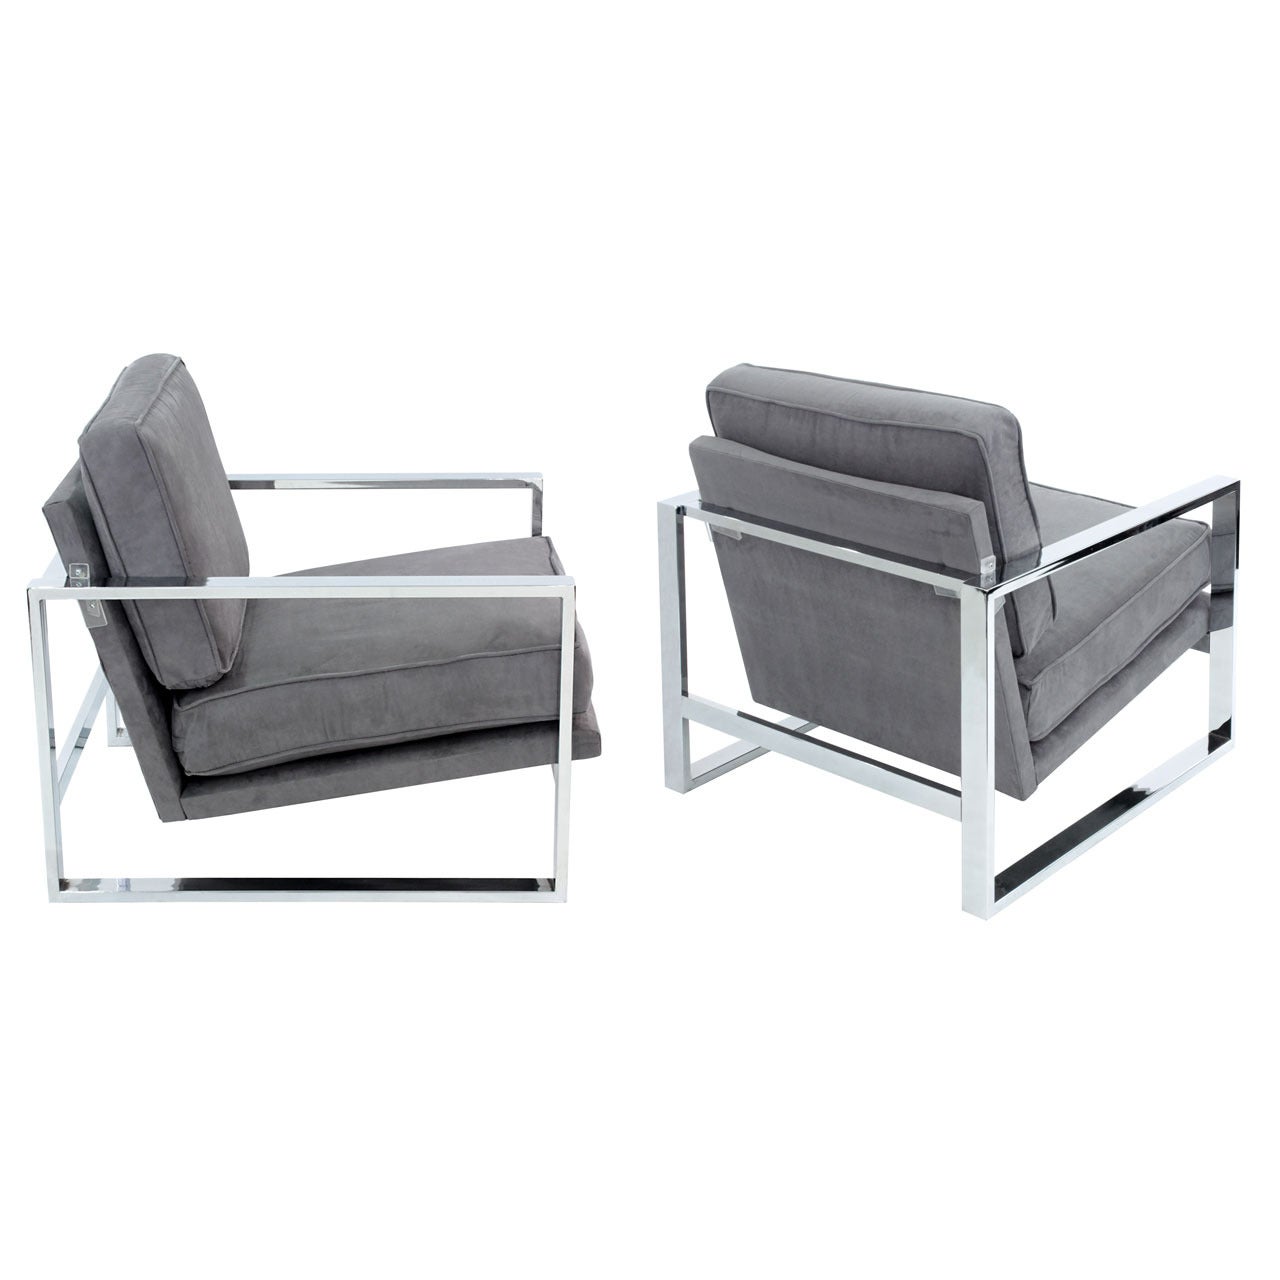 Pair of Sculptural Lounge Chairs with Chrome Frames